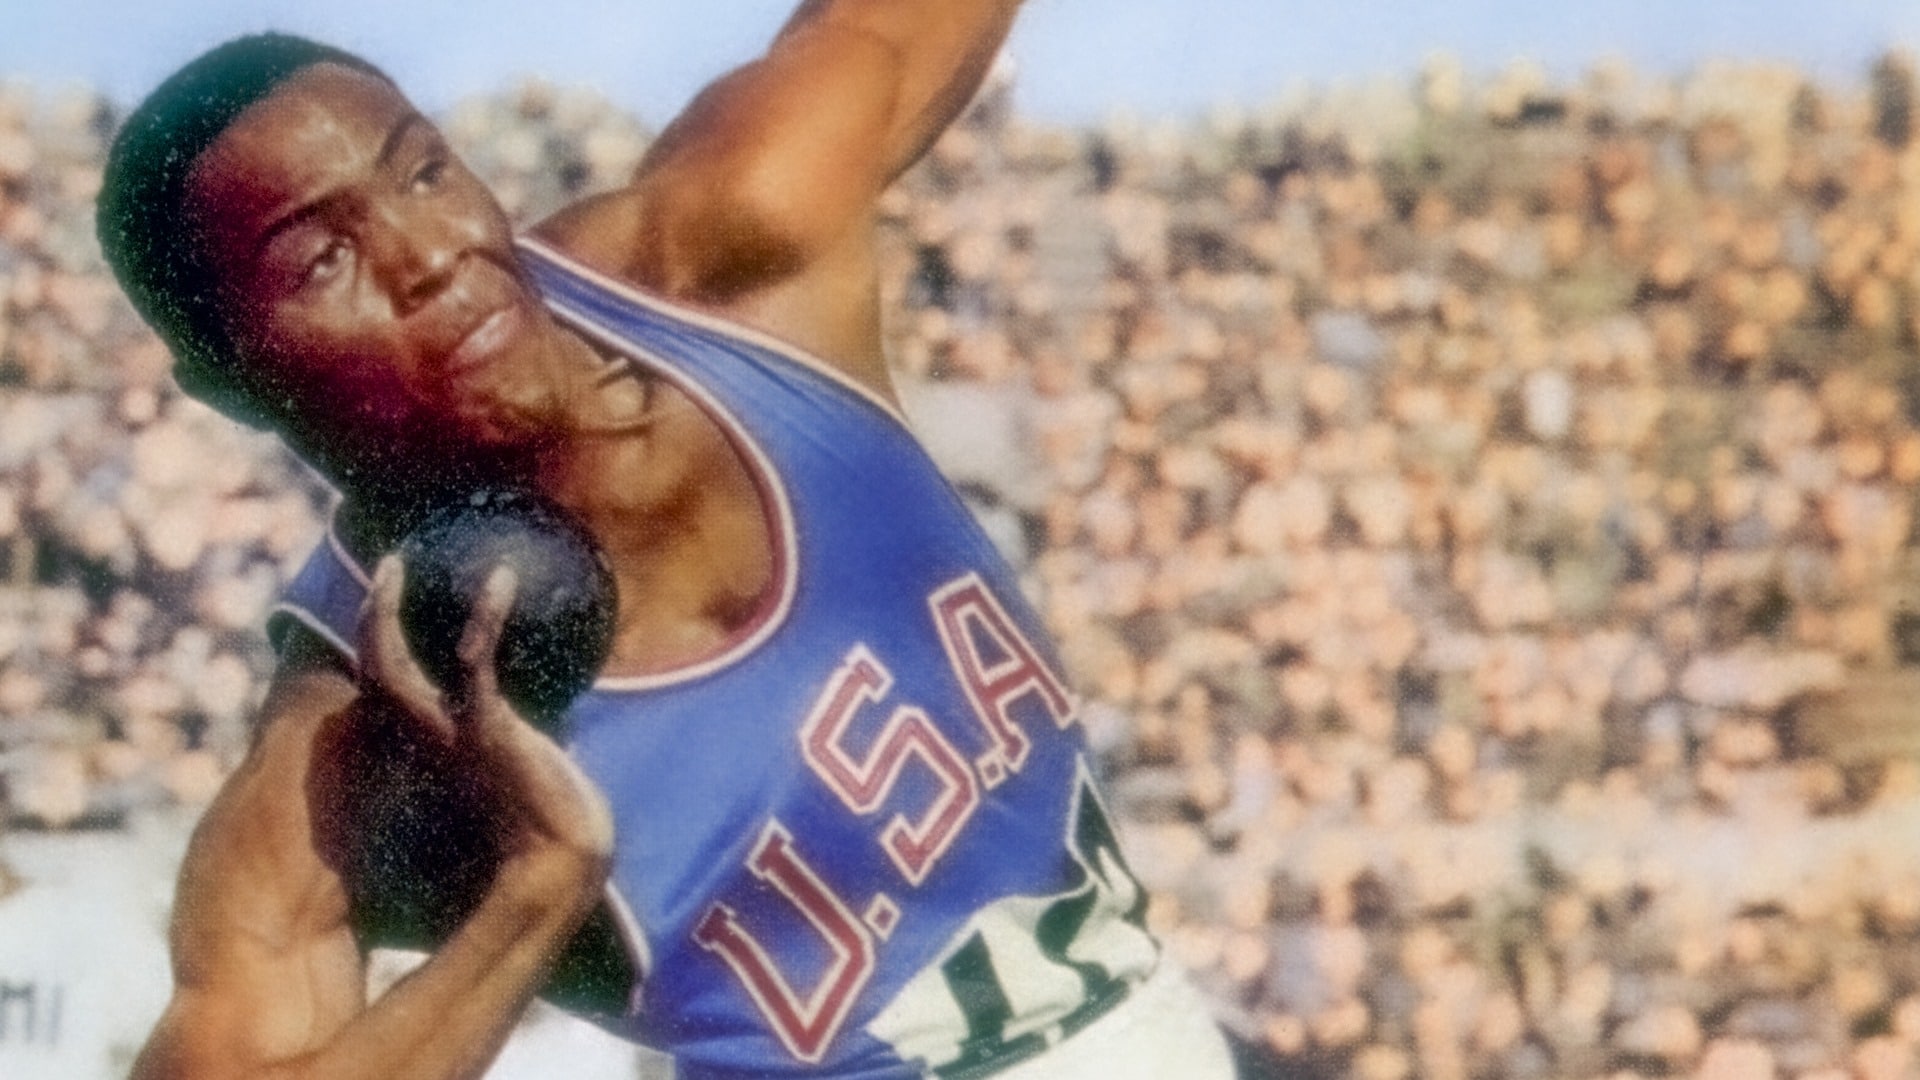 Rafer Johnson | Track and Field | Olympic Hall of Fame